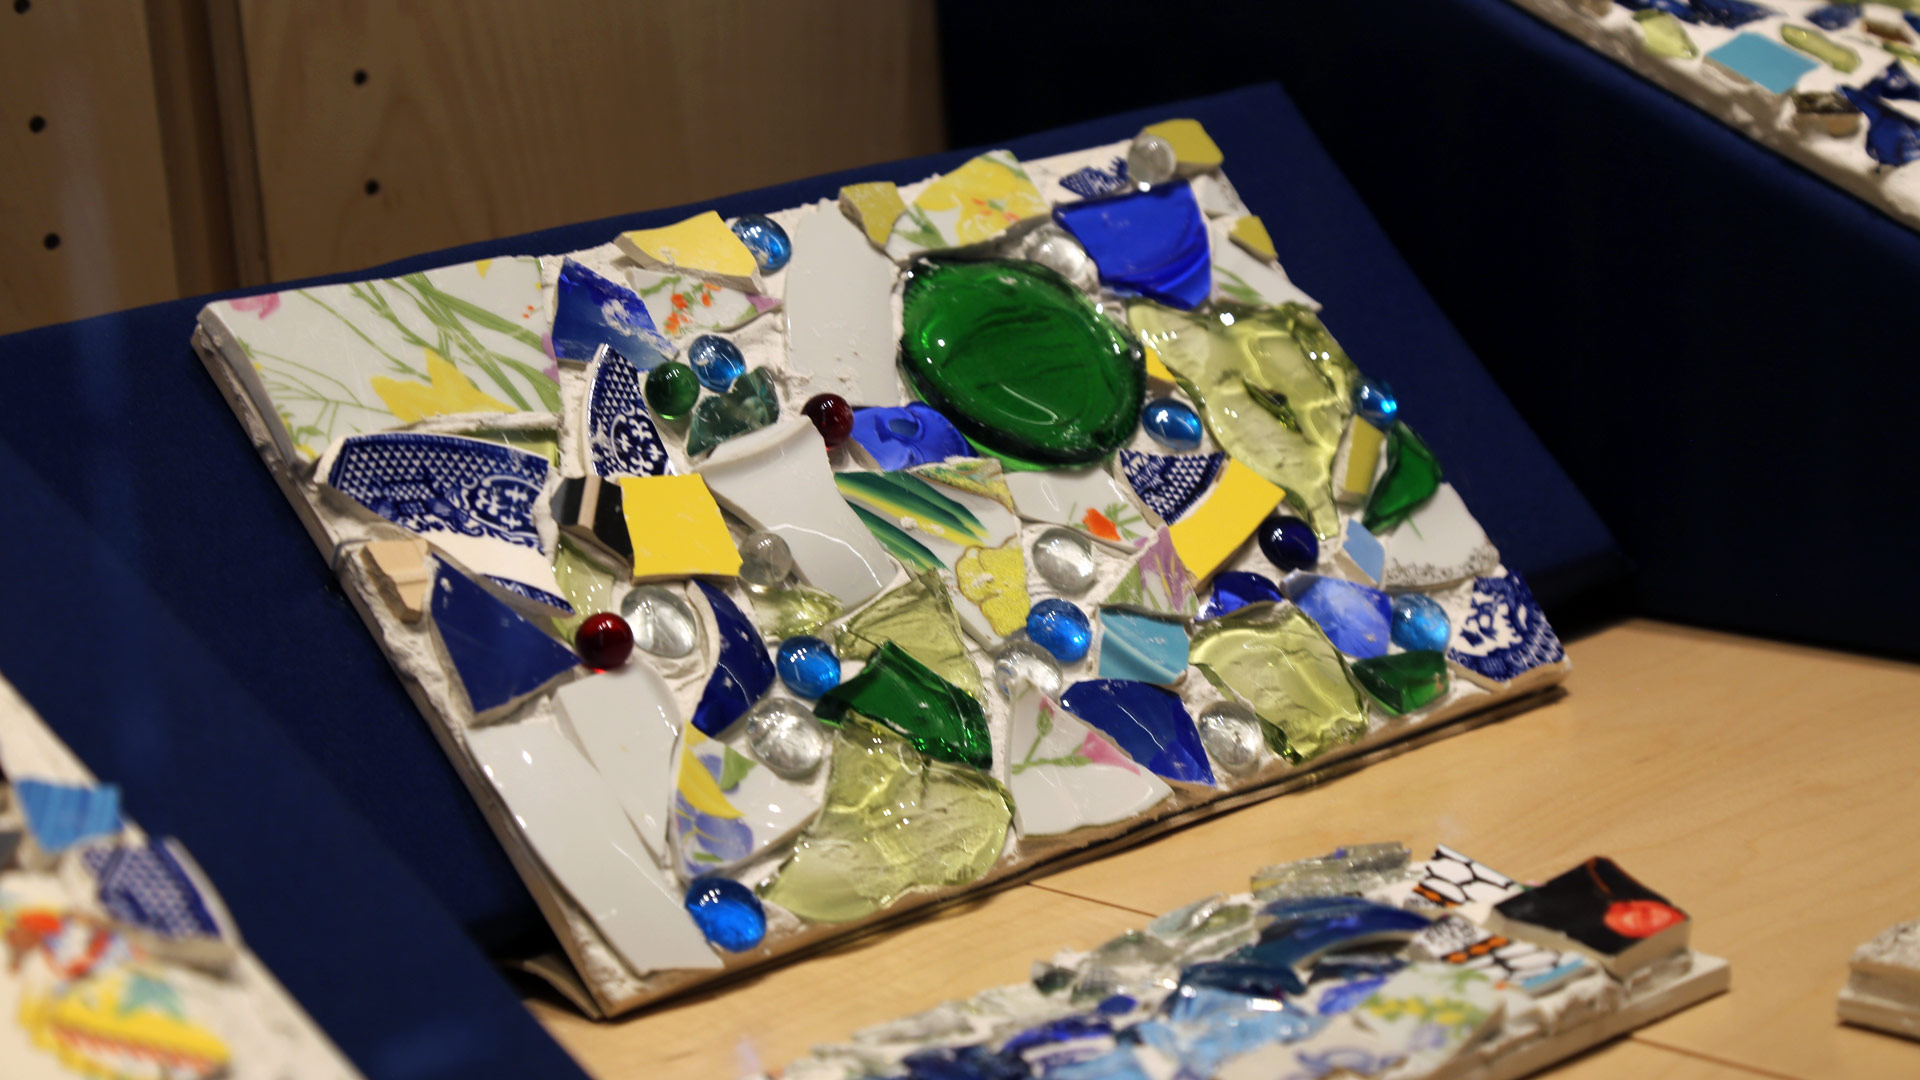 a close-up of one of the mosaics in the right case featuring broken plates, glass beads, and other materials